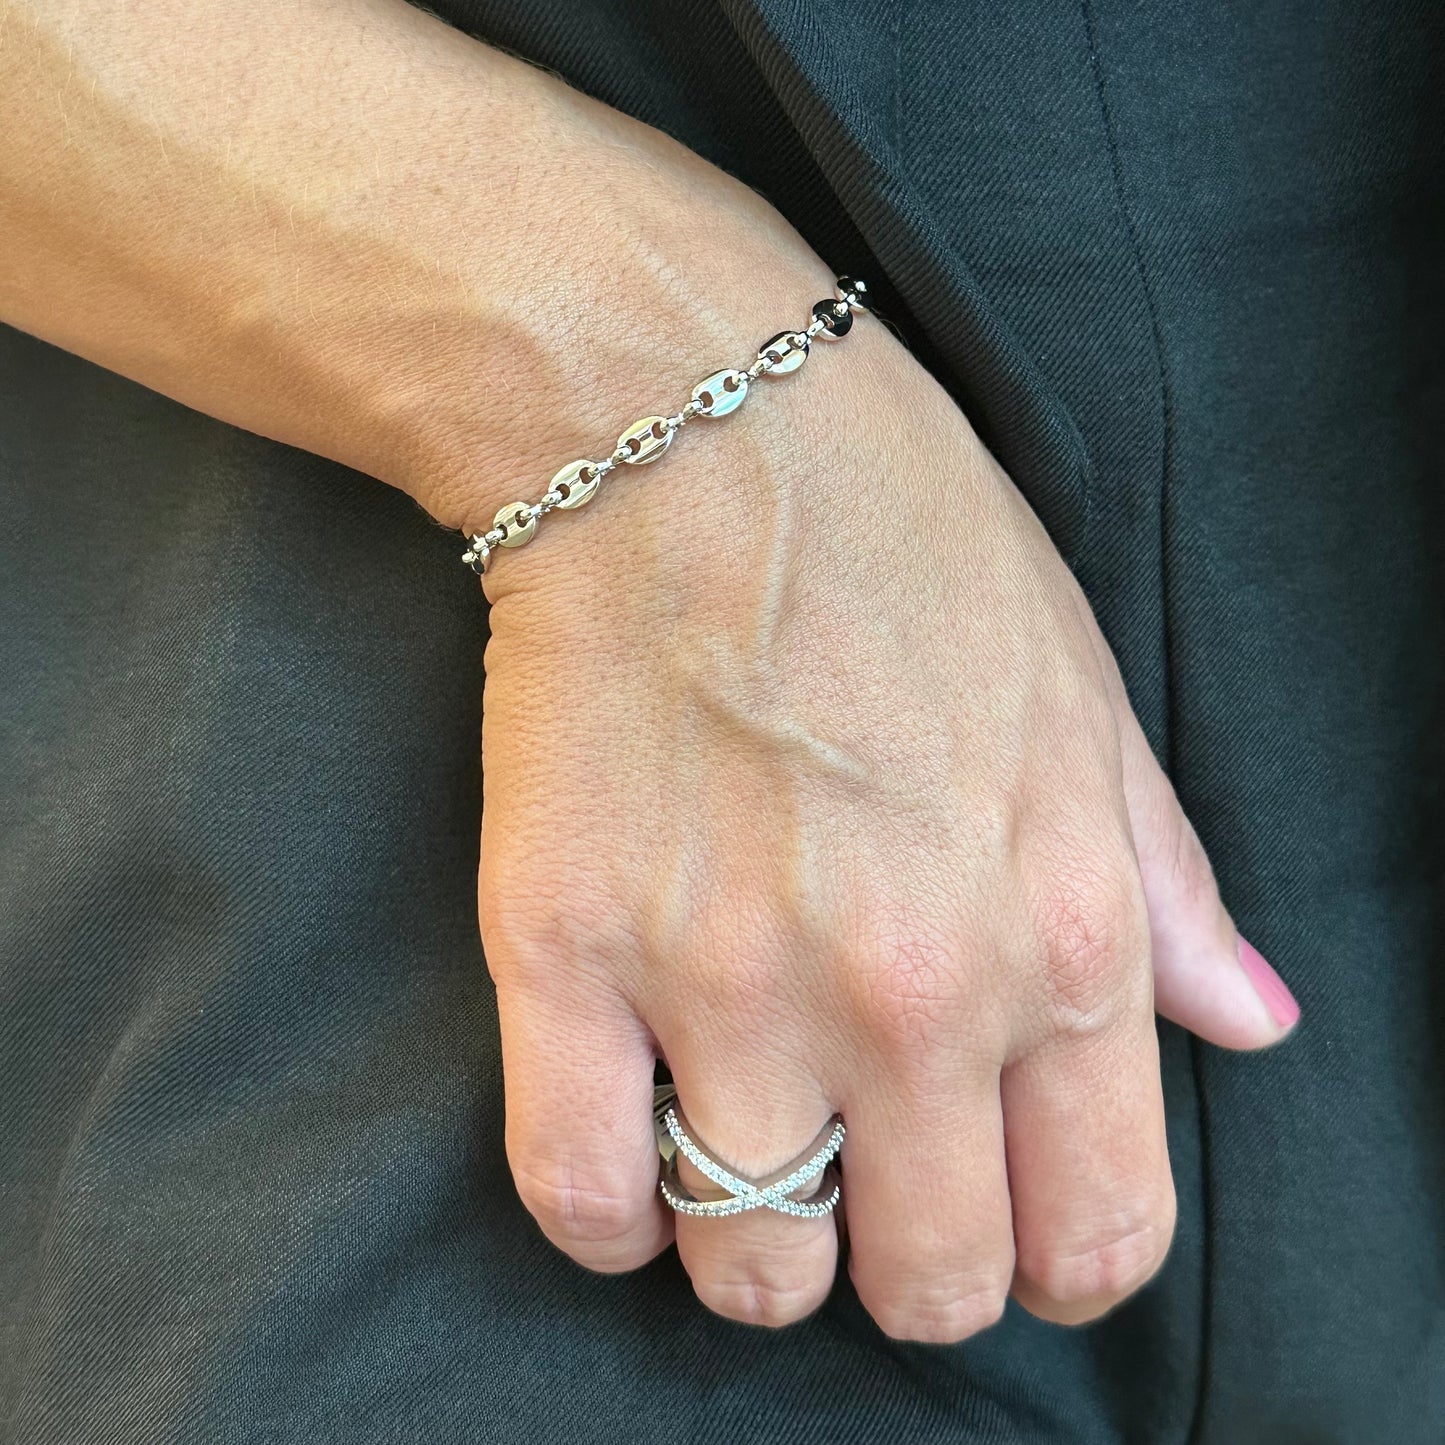 PUFFY LINKS BRACELET | Double White Rhodium Plated